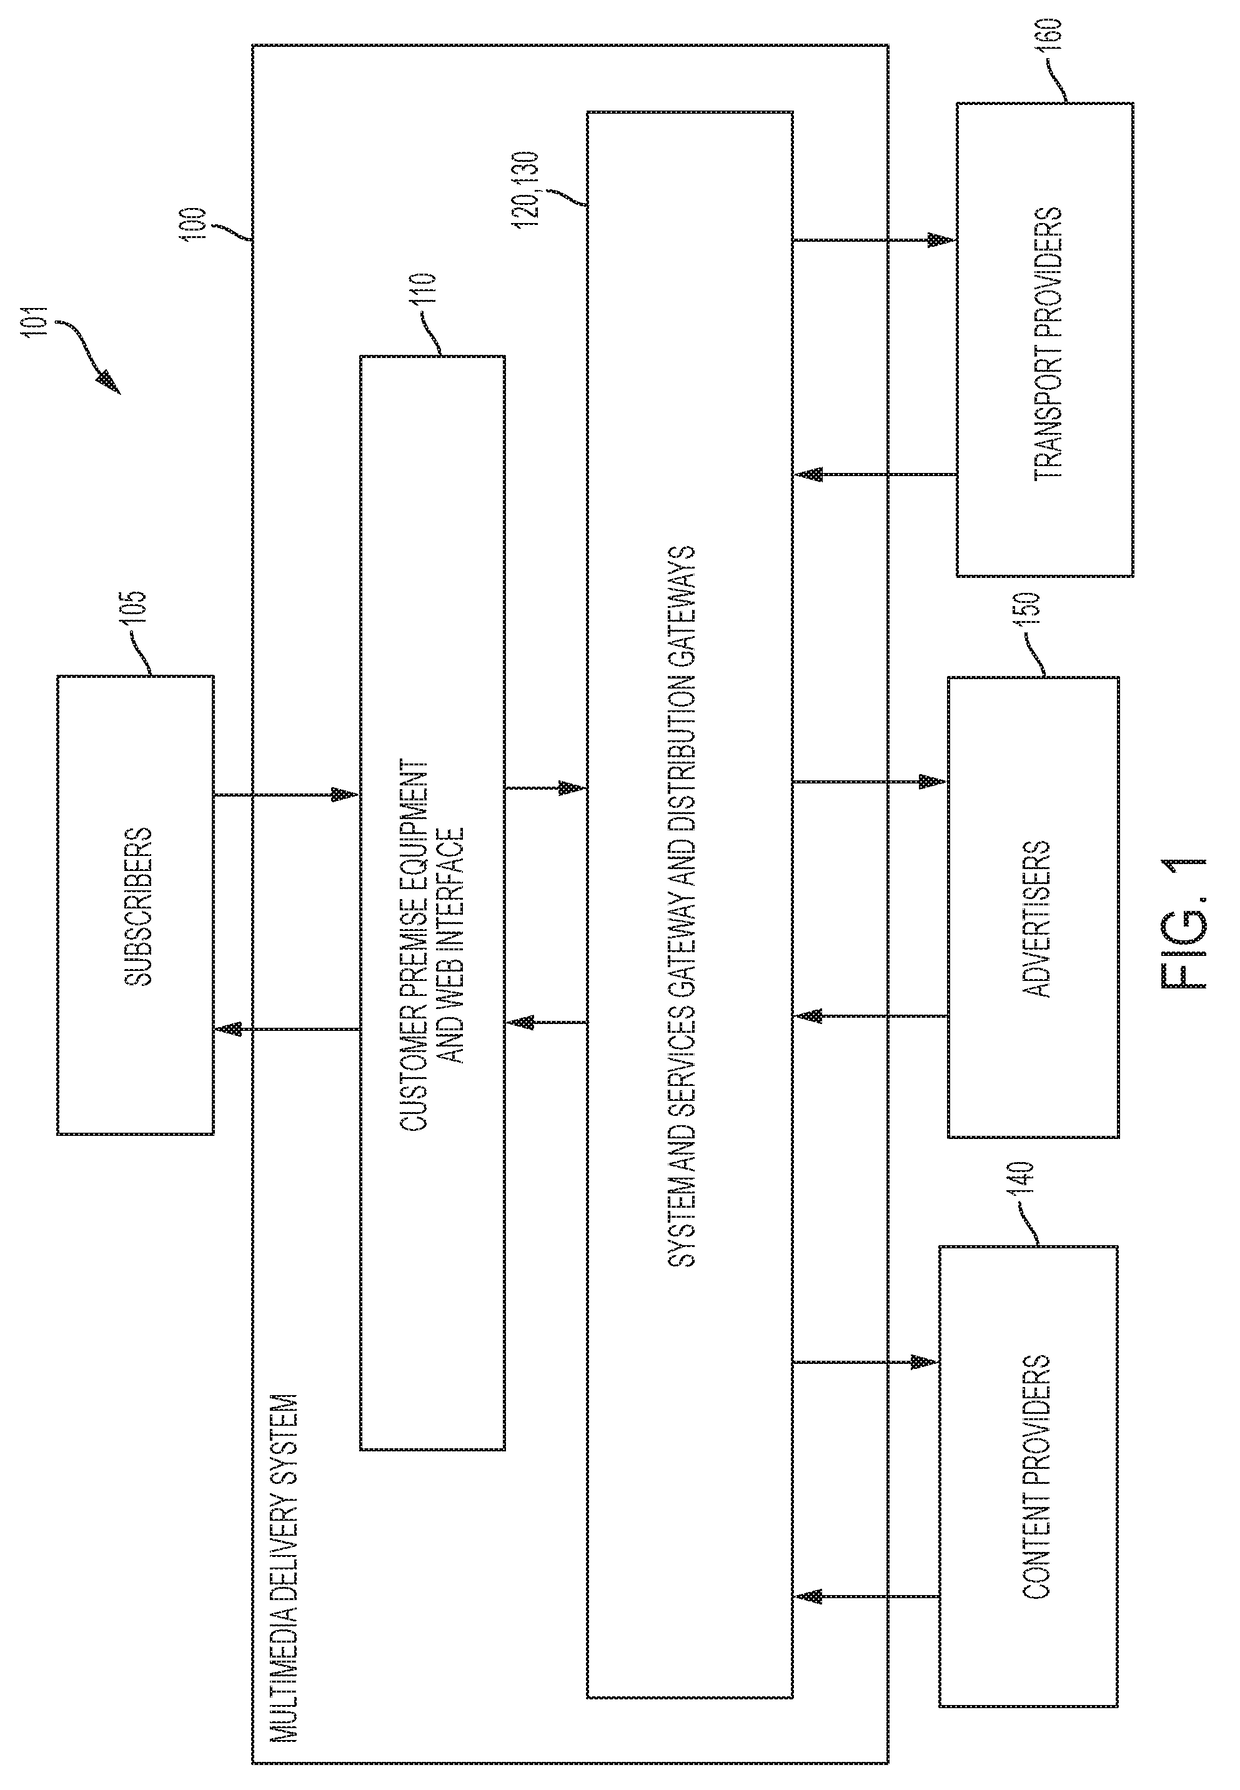 Clustering and adjudication to determine a recommendation of multimedia content